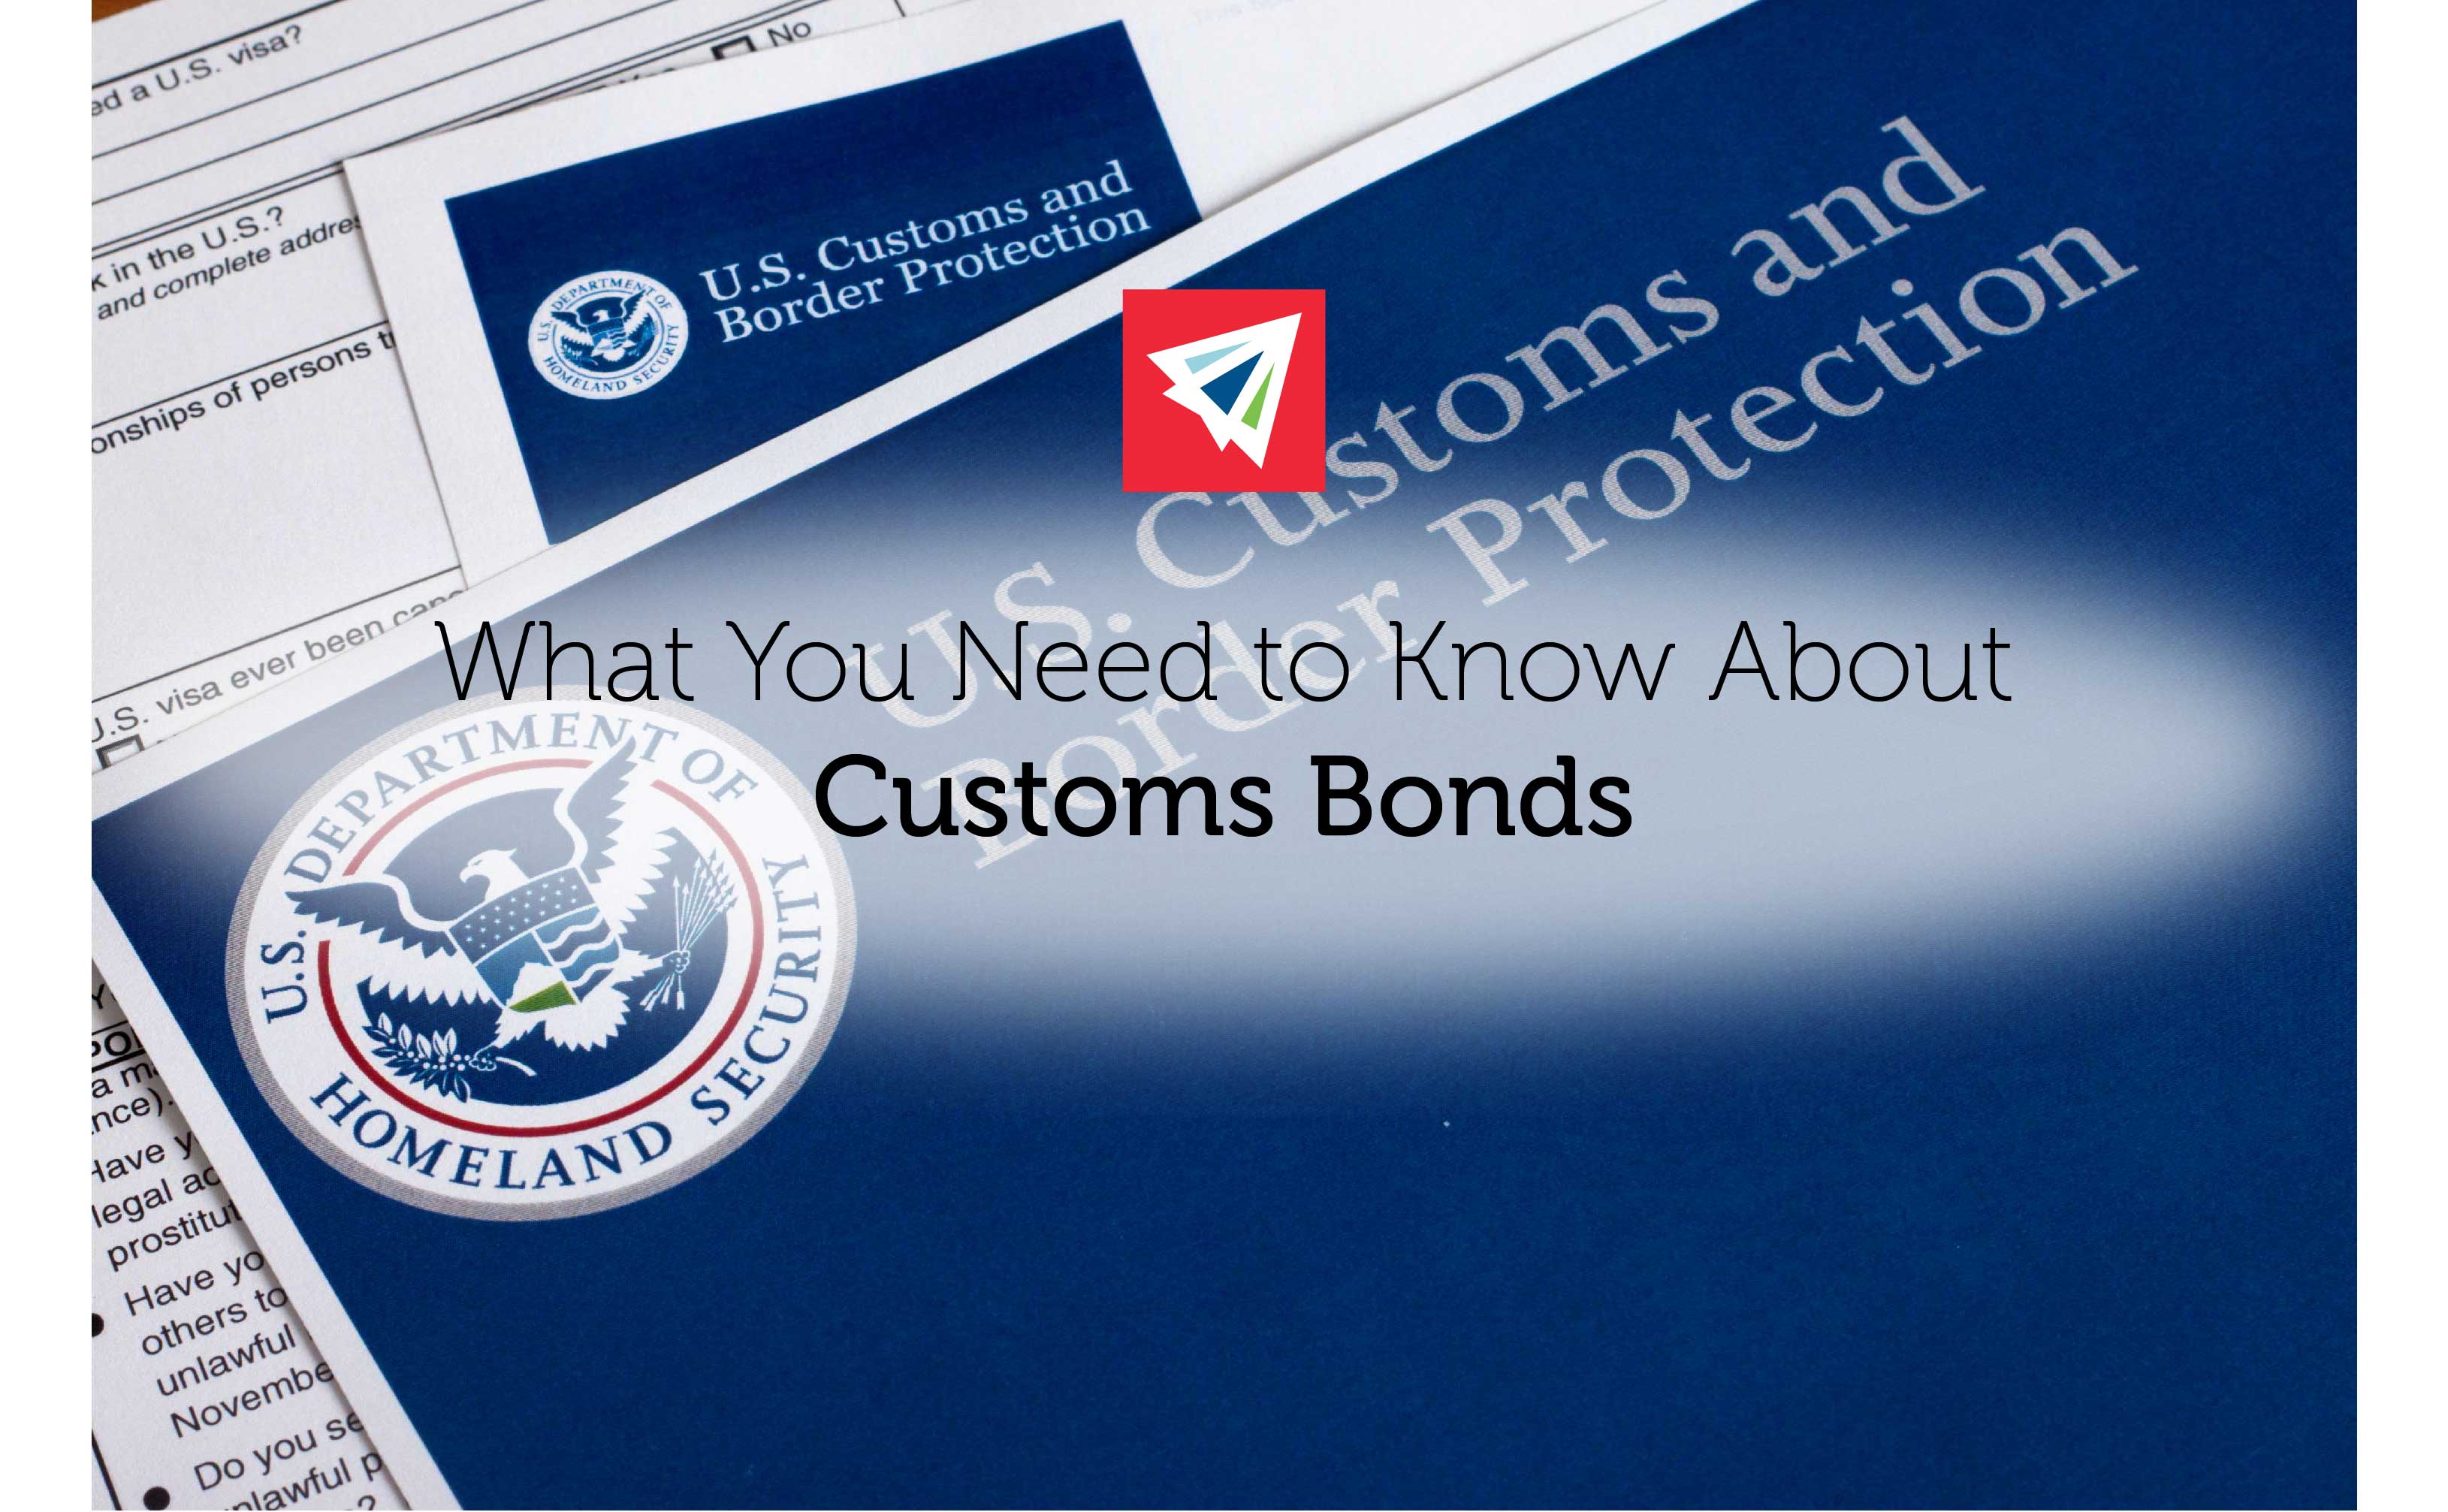 Customs Bonds: What You Need to Know